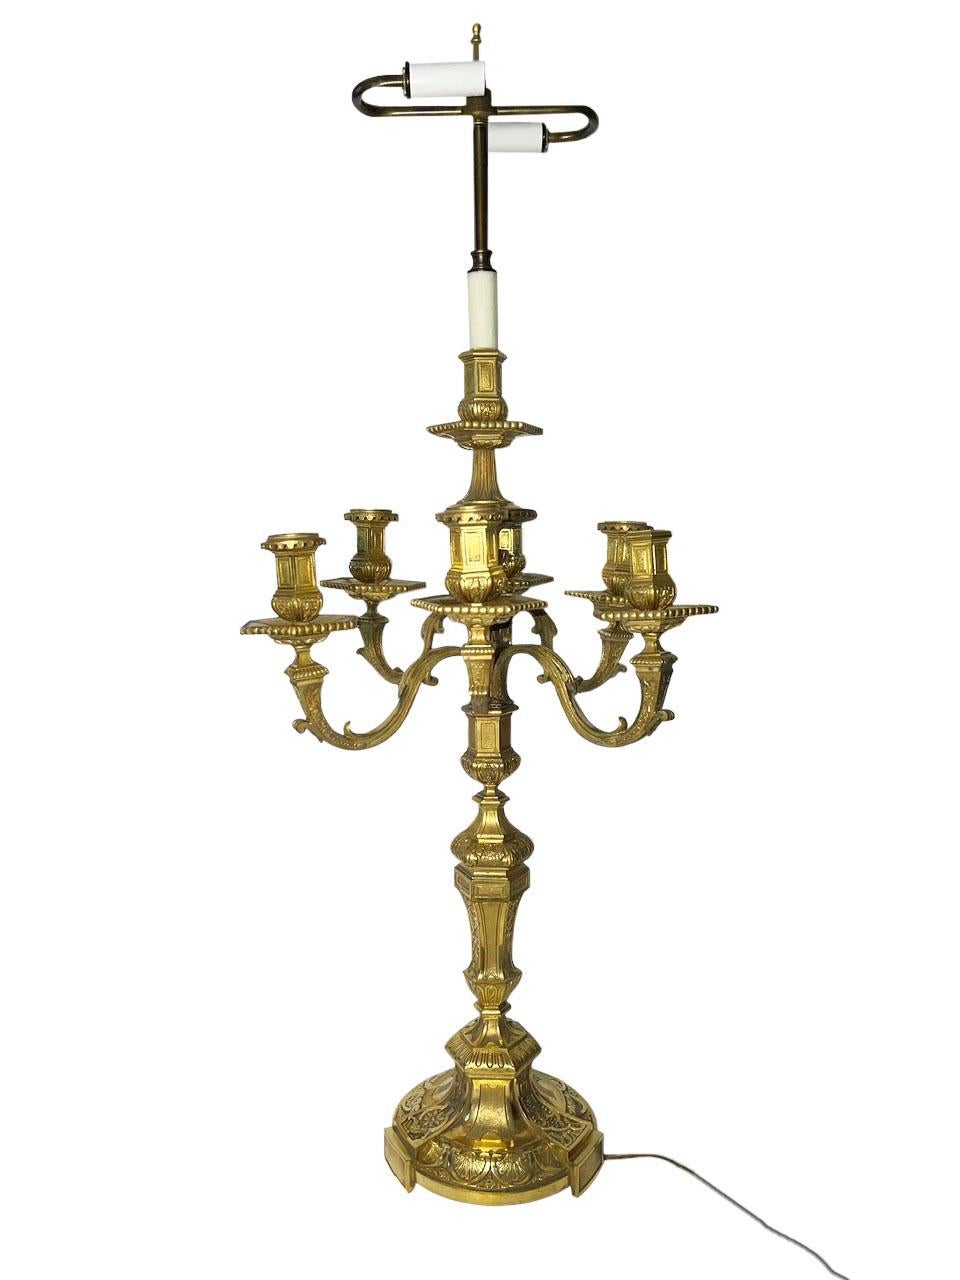 Fabulous pair of incredible six arm Henry Dasson gilt bronze candelabra now as electrified lamps. Original bronze dore gold is in great condition. Henry Dasson is considered one of the finest makers of gilt bronze, with one characteristic of his